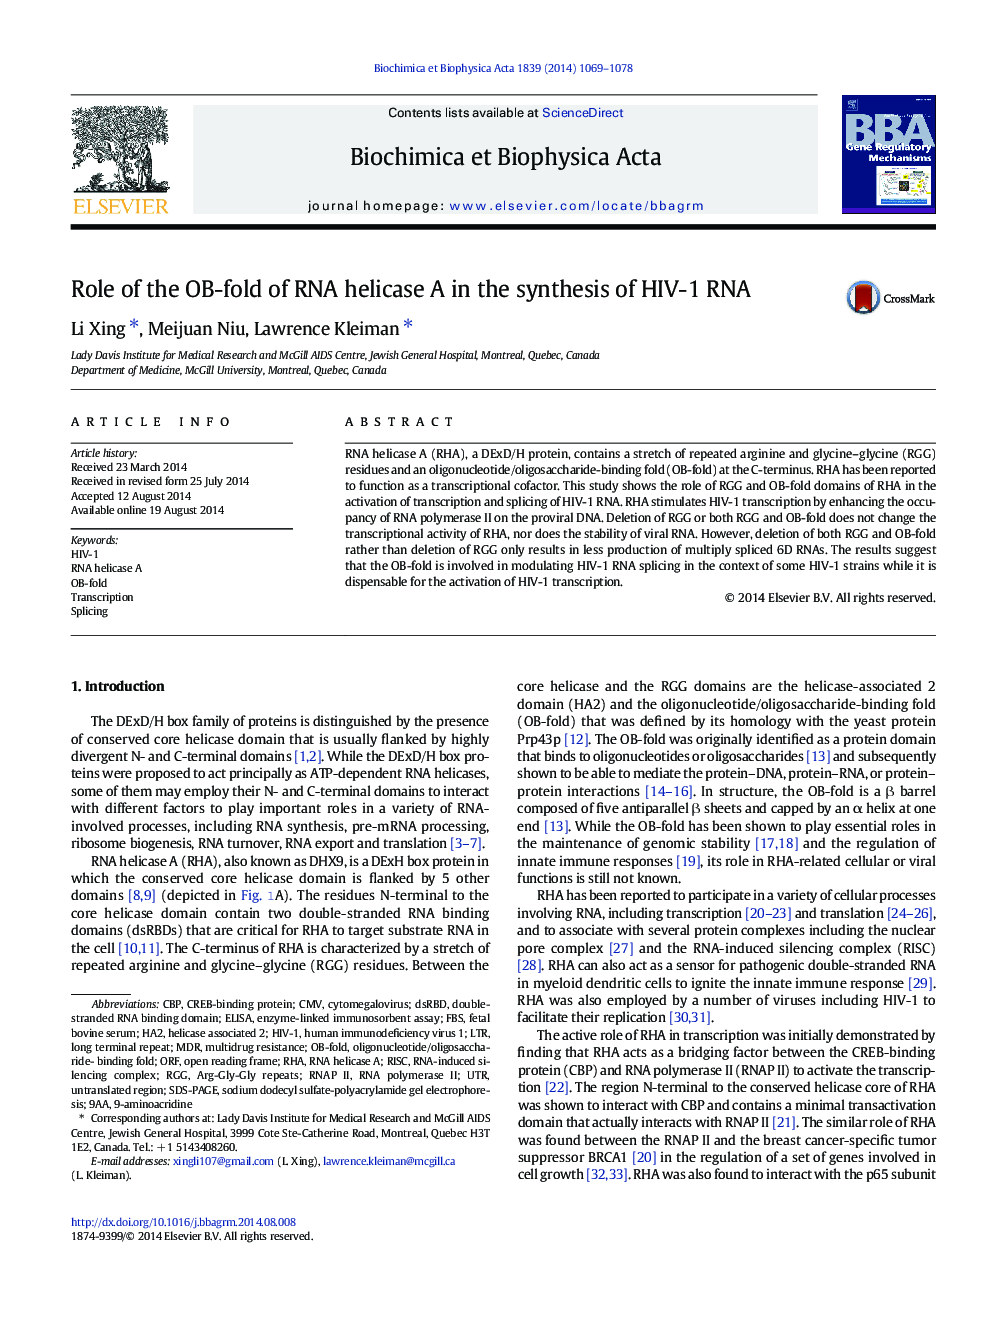 Role of the OB-fold of RNA helicase A in the synthesis of HIV-1 RNA